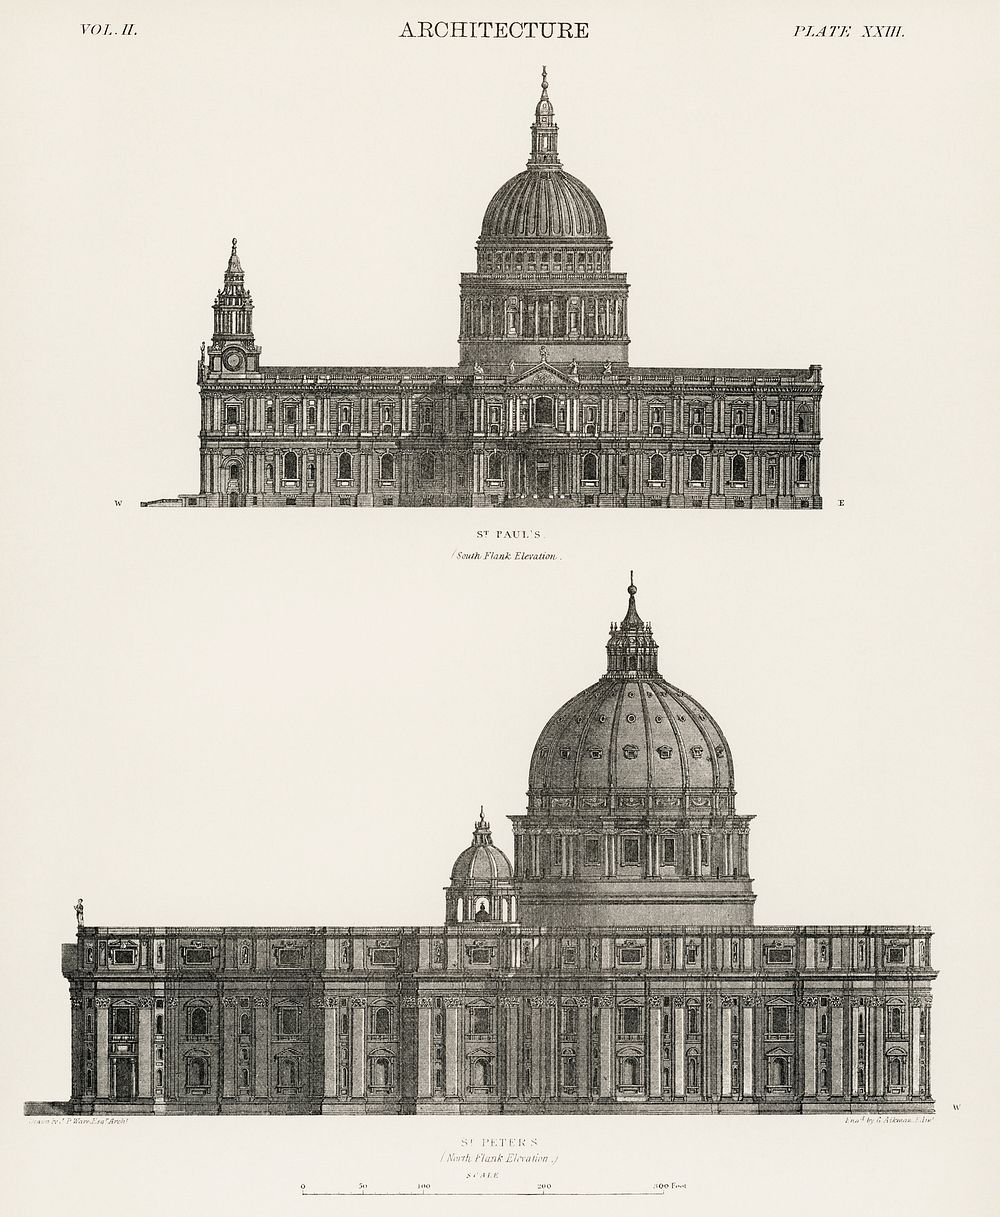 Architecture: St. Paul and St. Peters Cathedral from the book, Encyclopaedia Britannica 9th edition (1875), illustration of…